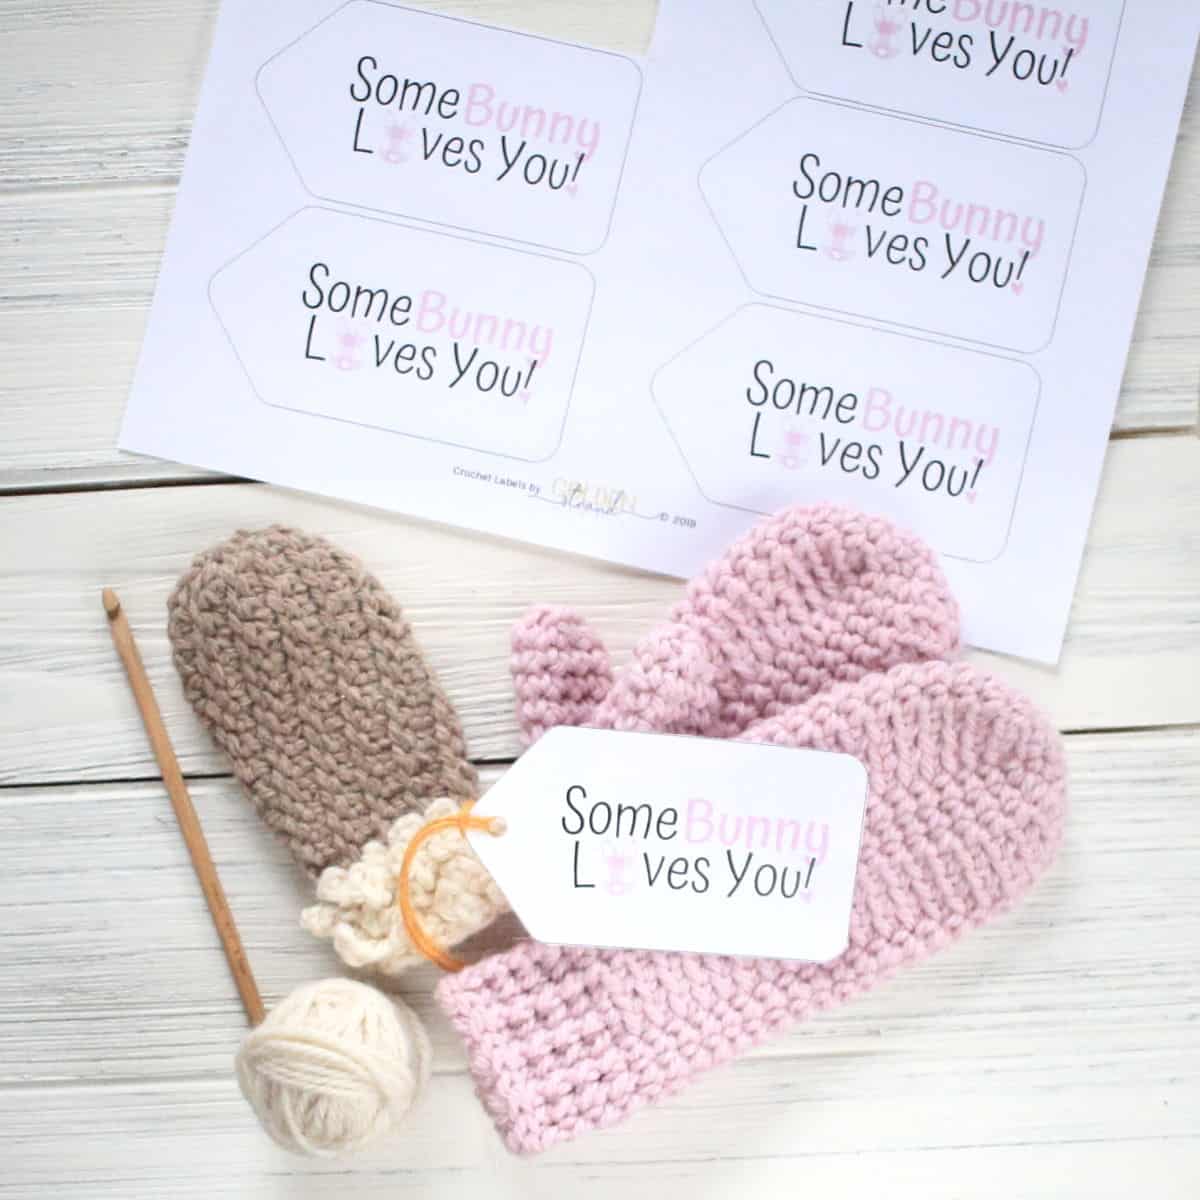 Gingham Bunny Gift Tags - Some Bunny Loves You